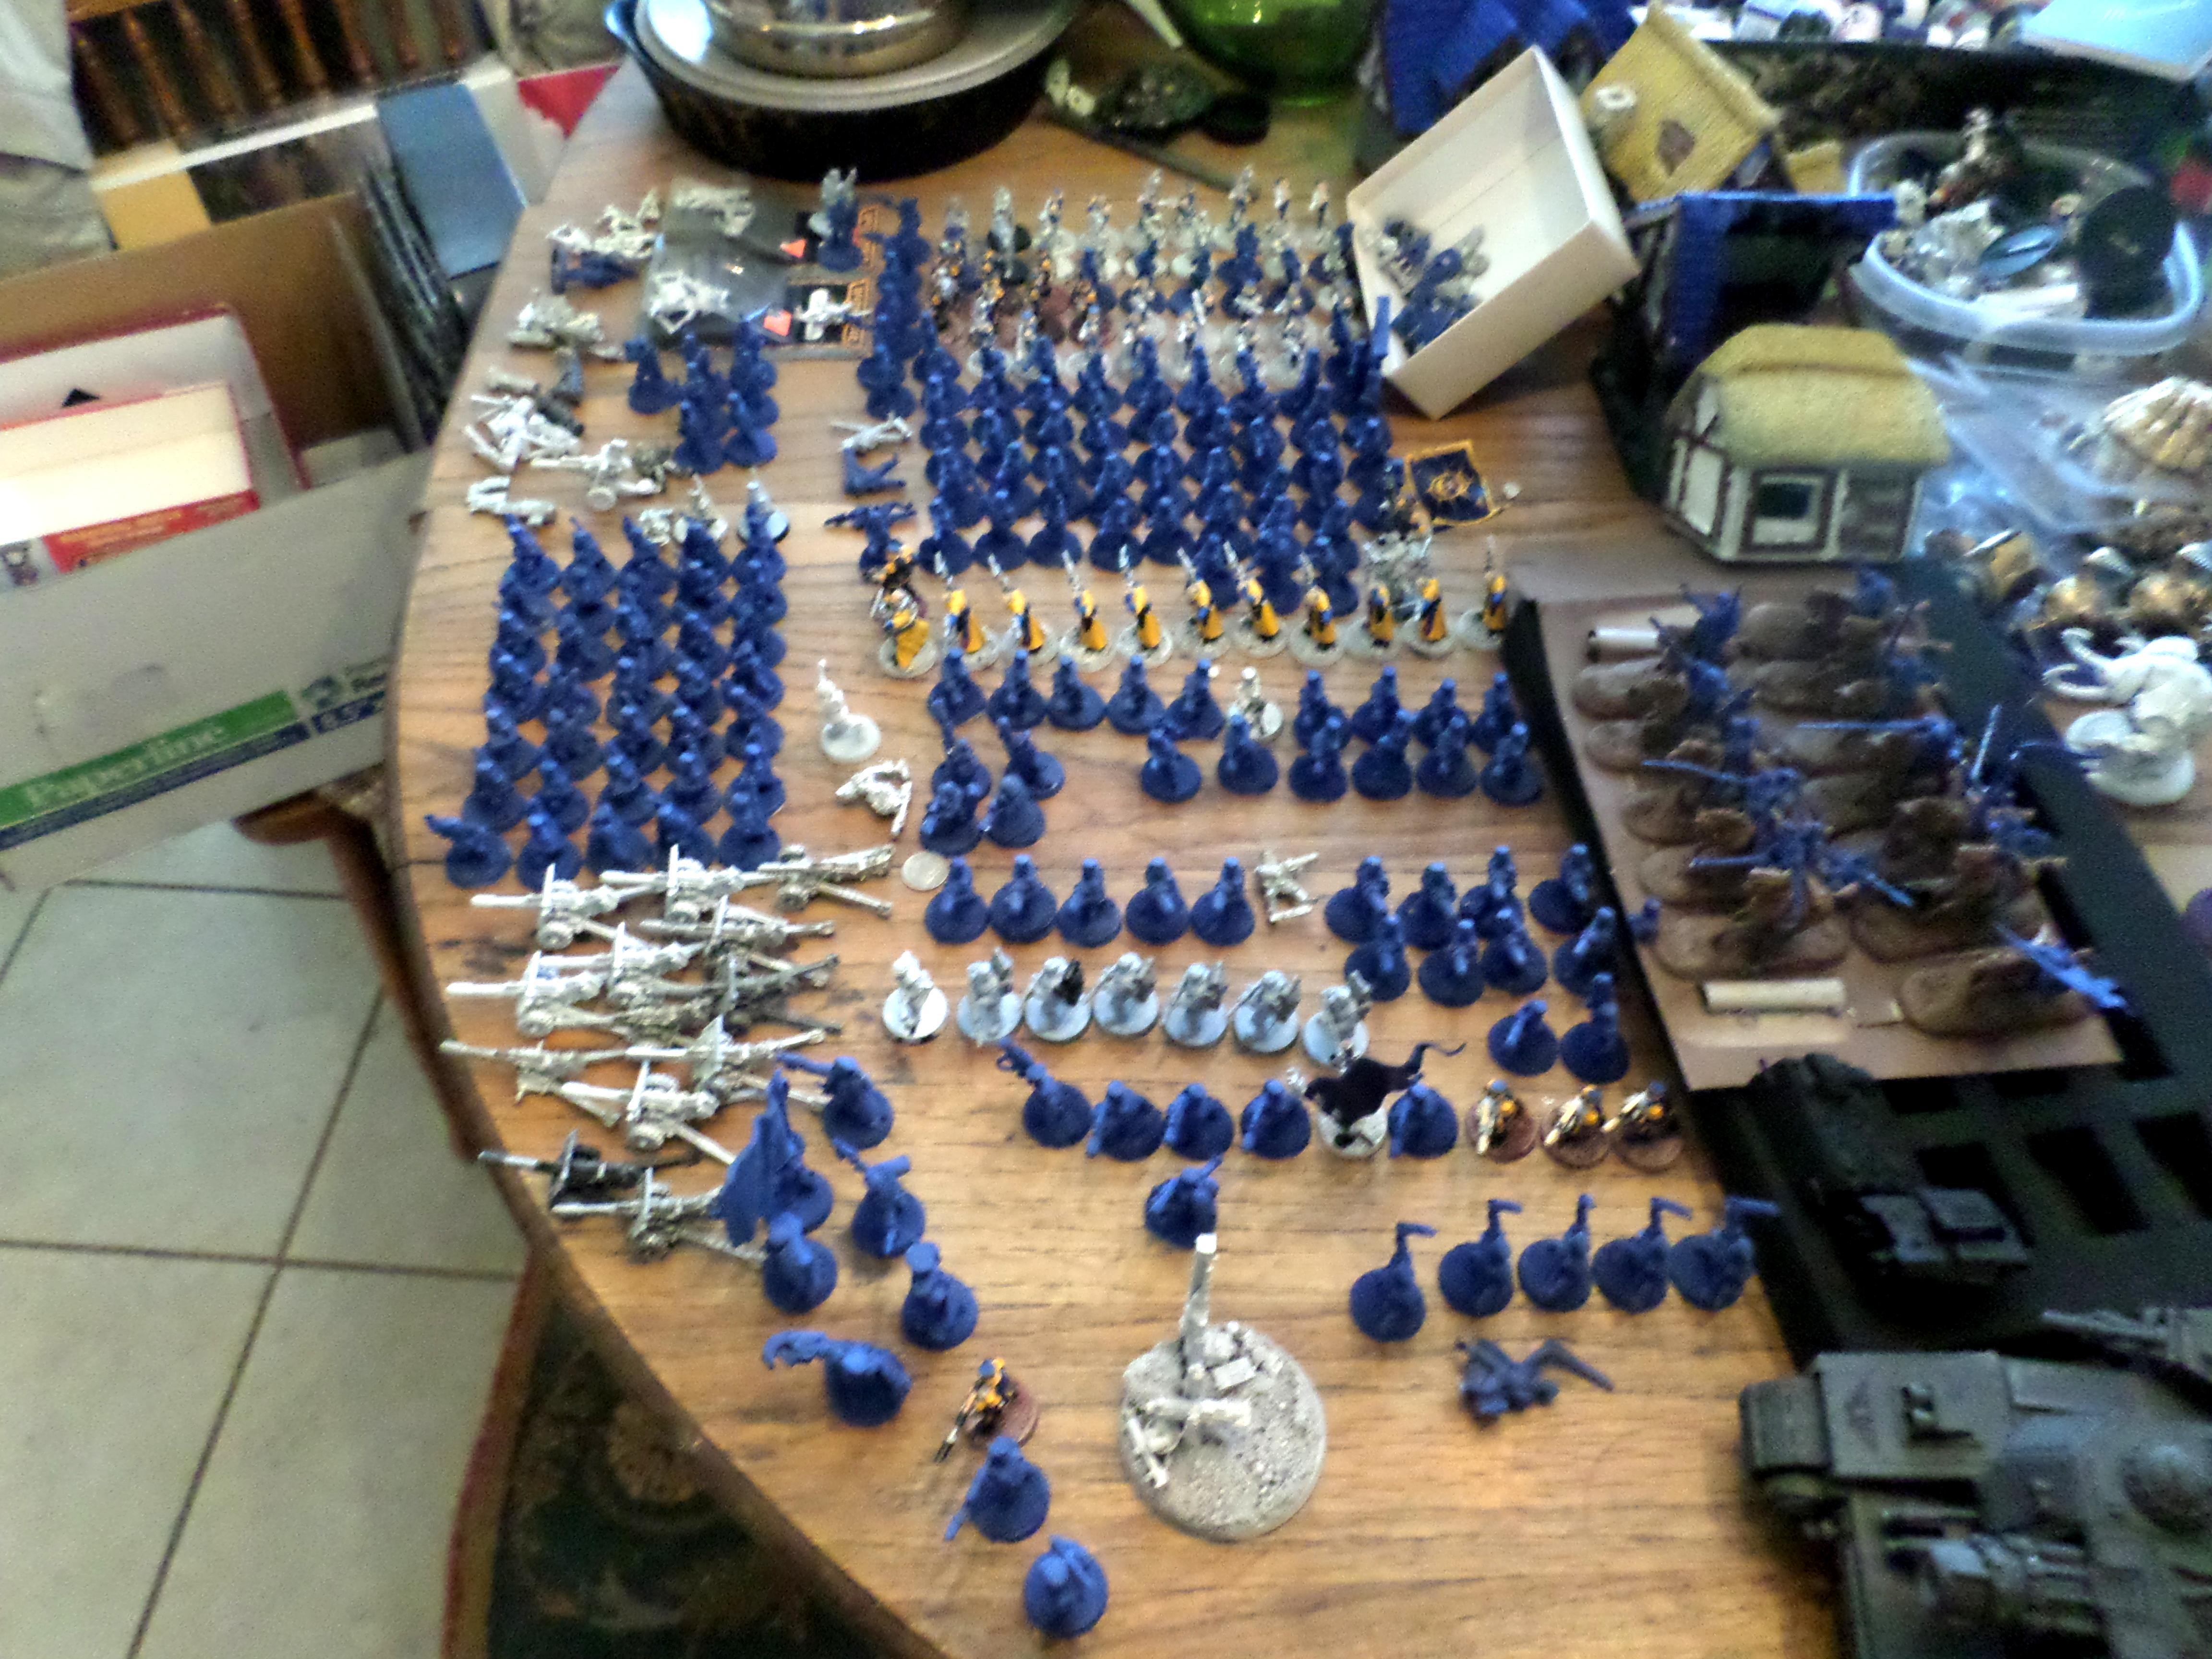 Build, Classic, Conversion, Games Workshop, Imperial Guard, Mordian, Mordian Iron Guard, Painting, Project, Warhammer 40,000, Warhammer Fantasy